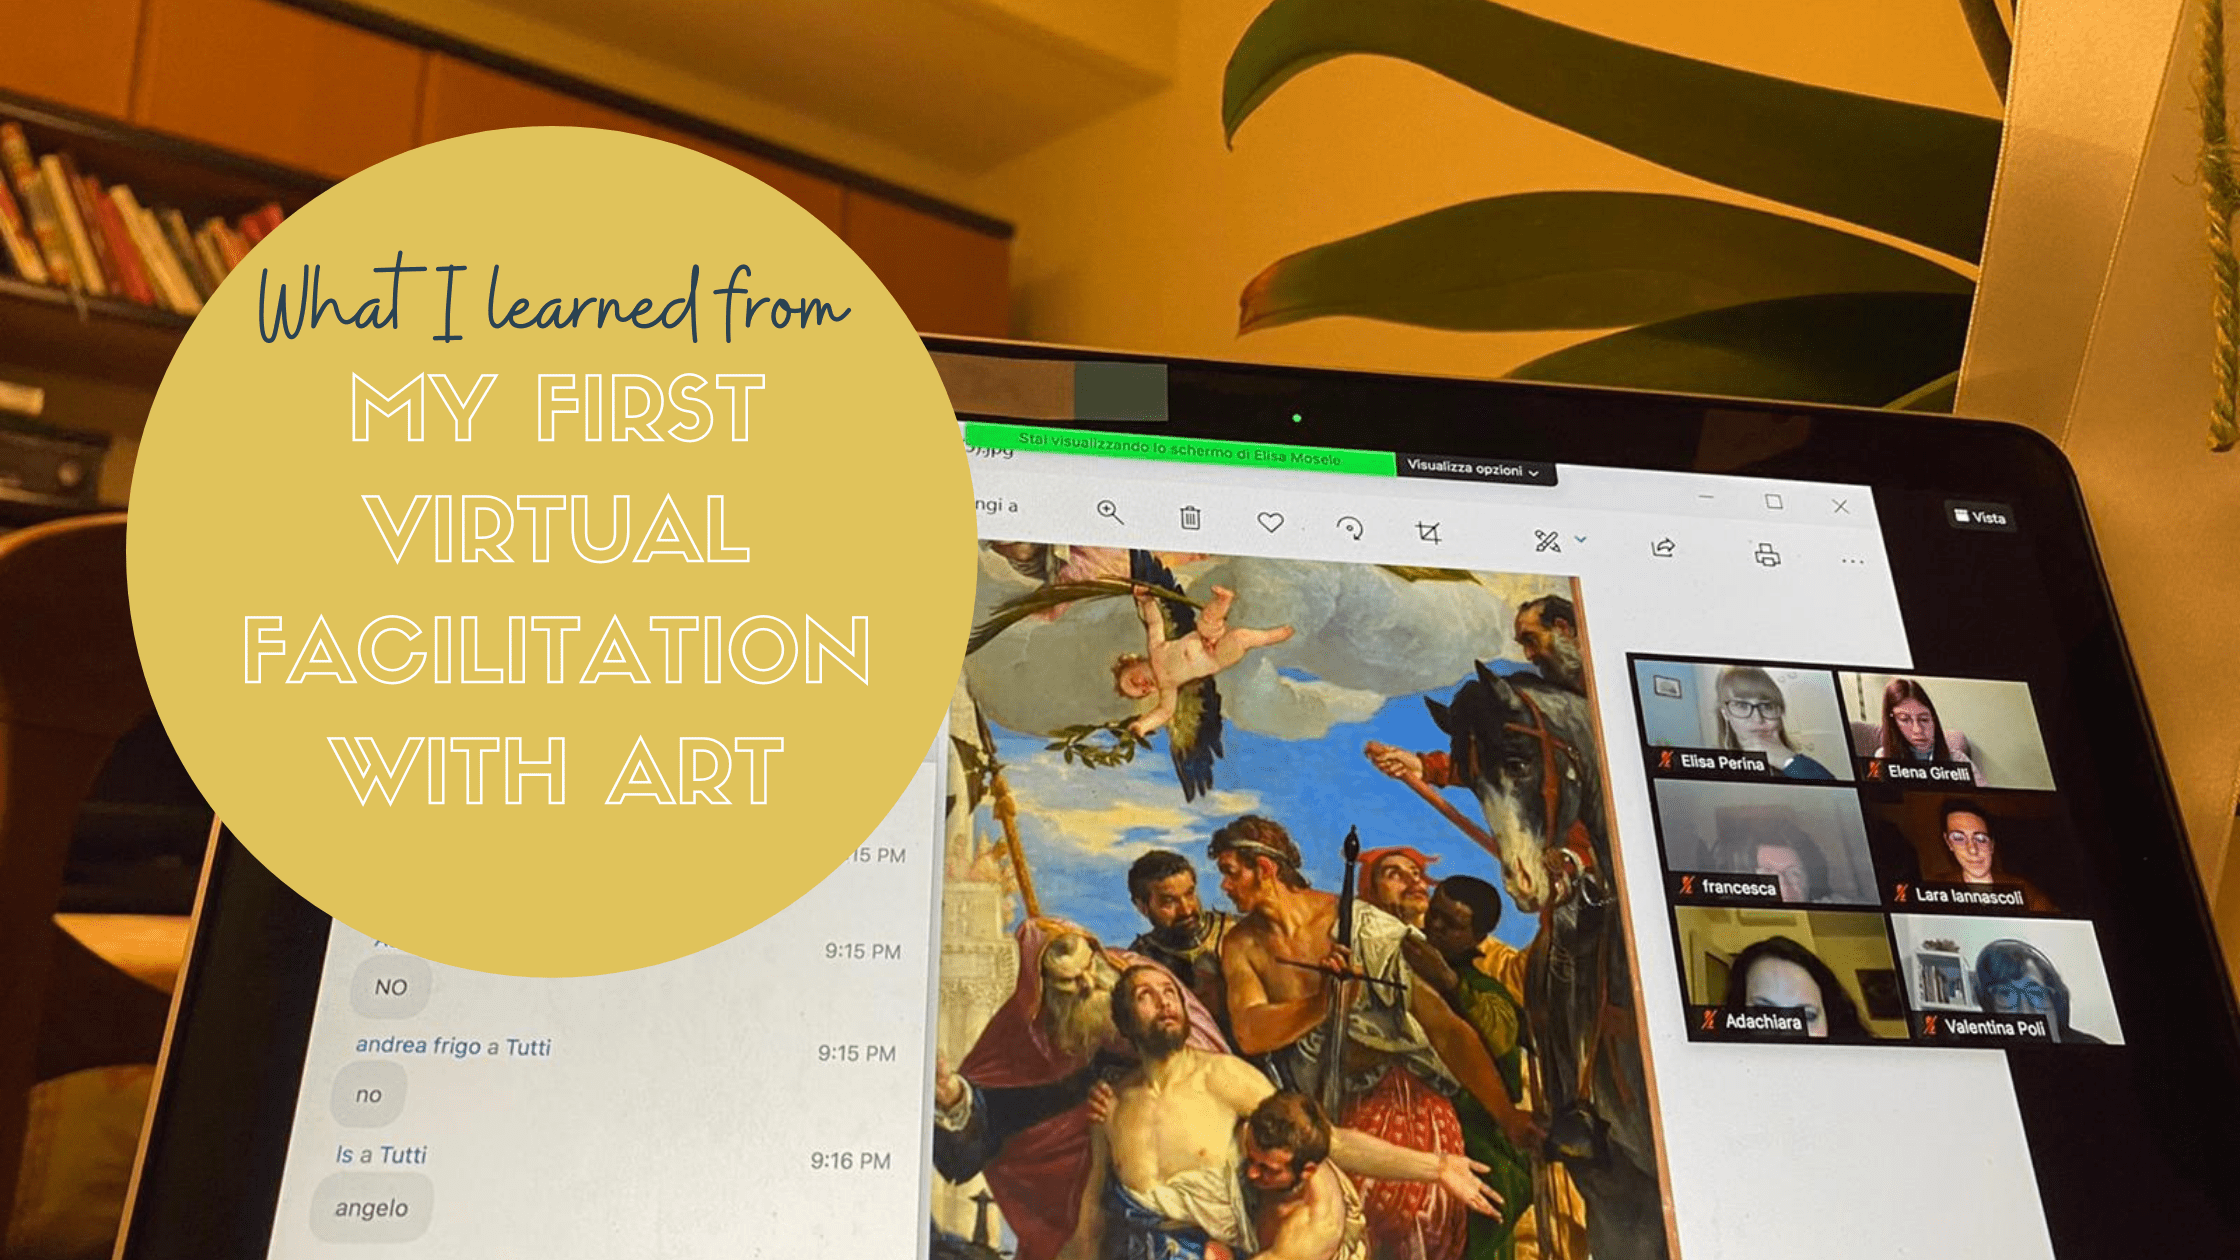 What I learned from my first virtual facilitation session with art